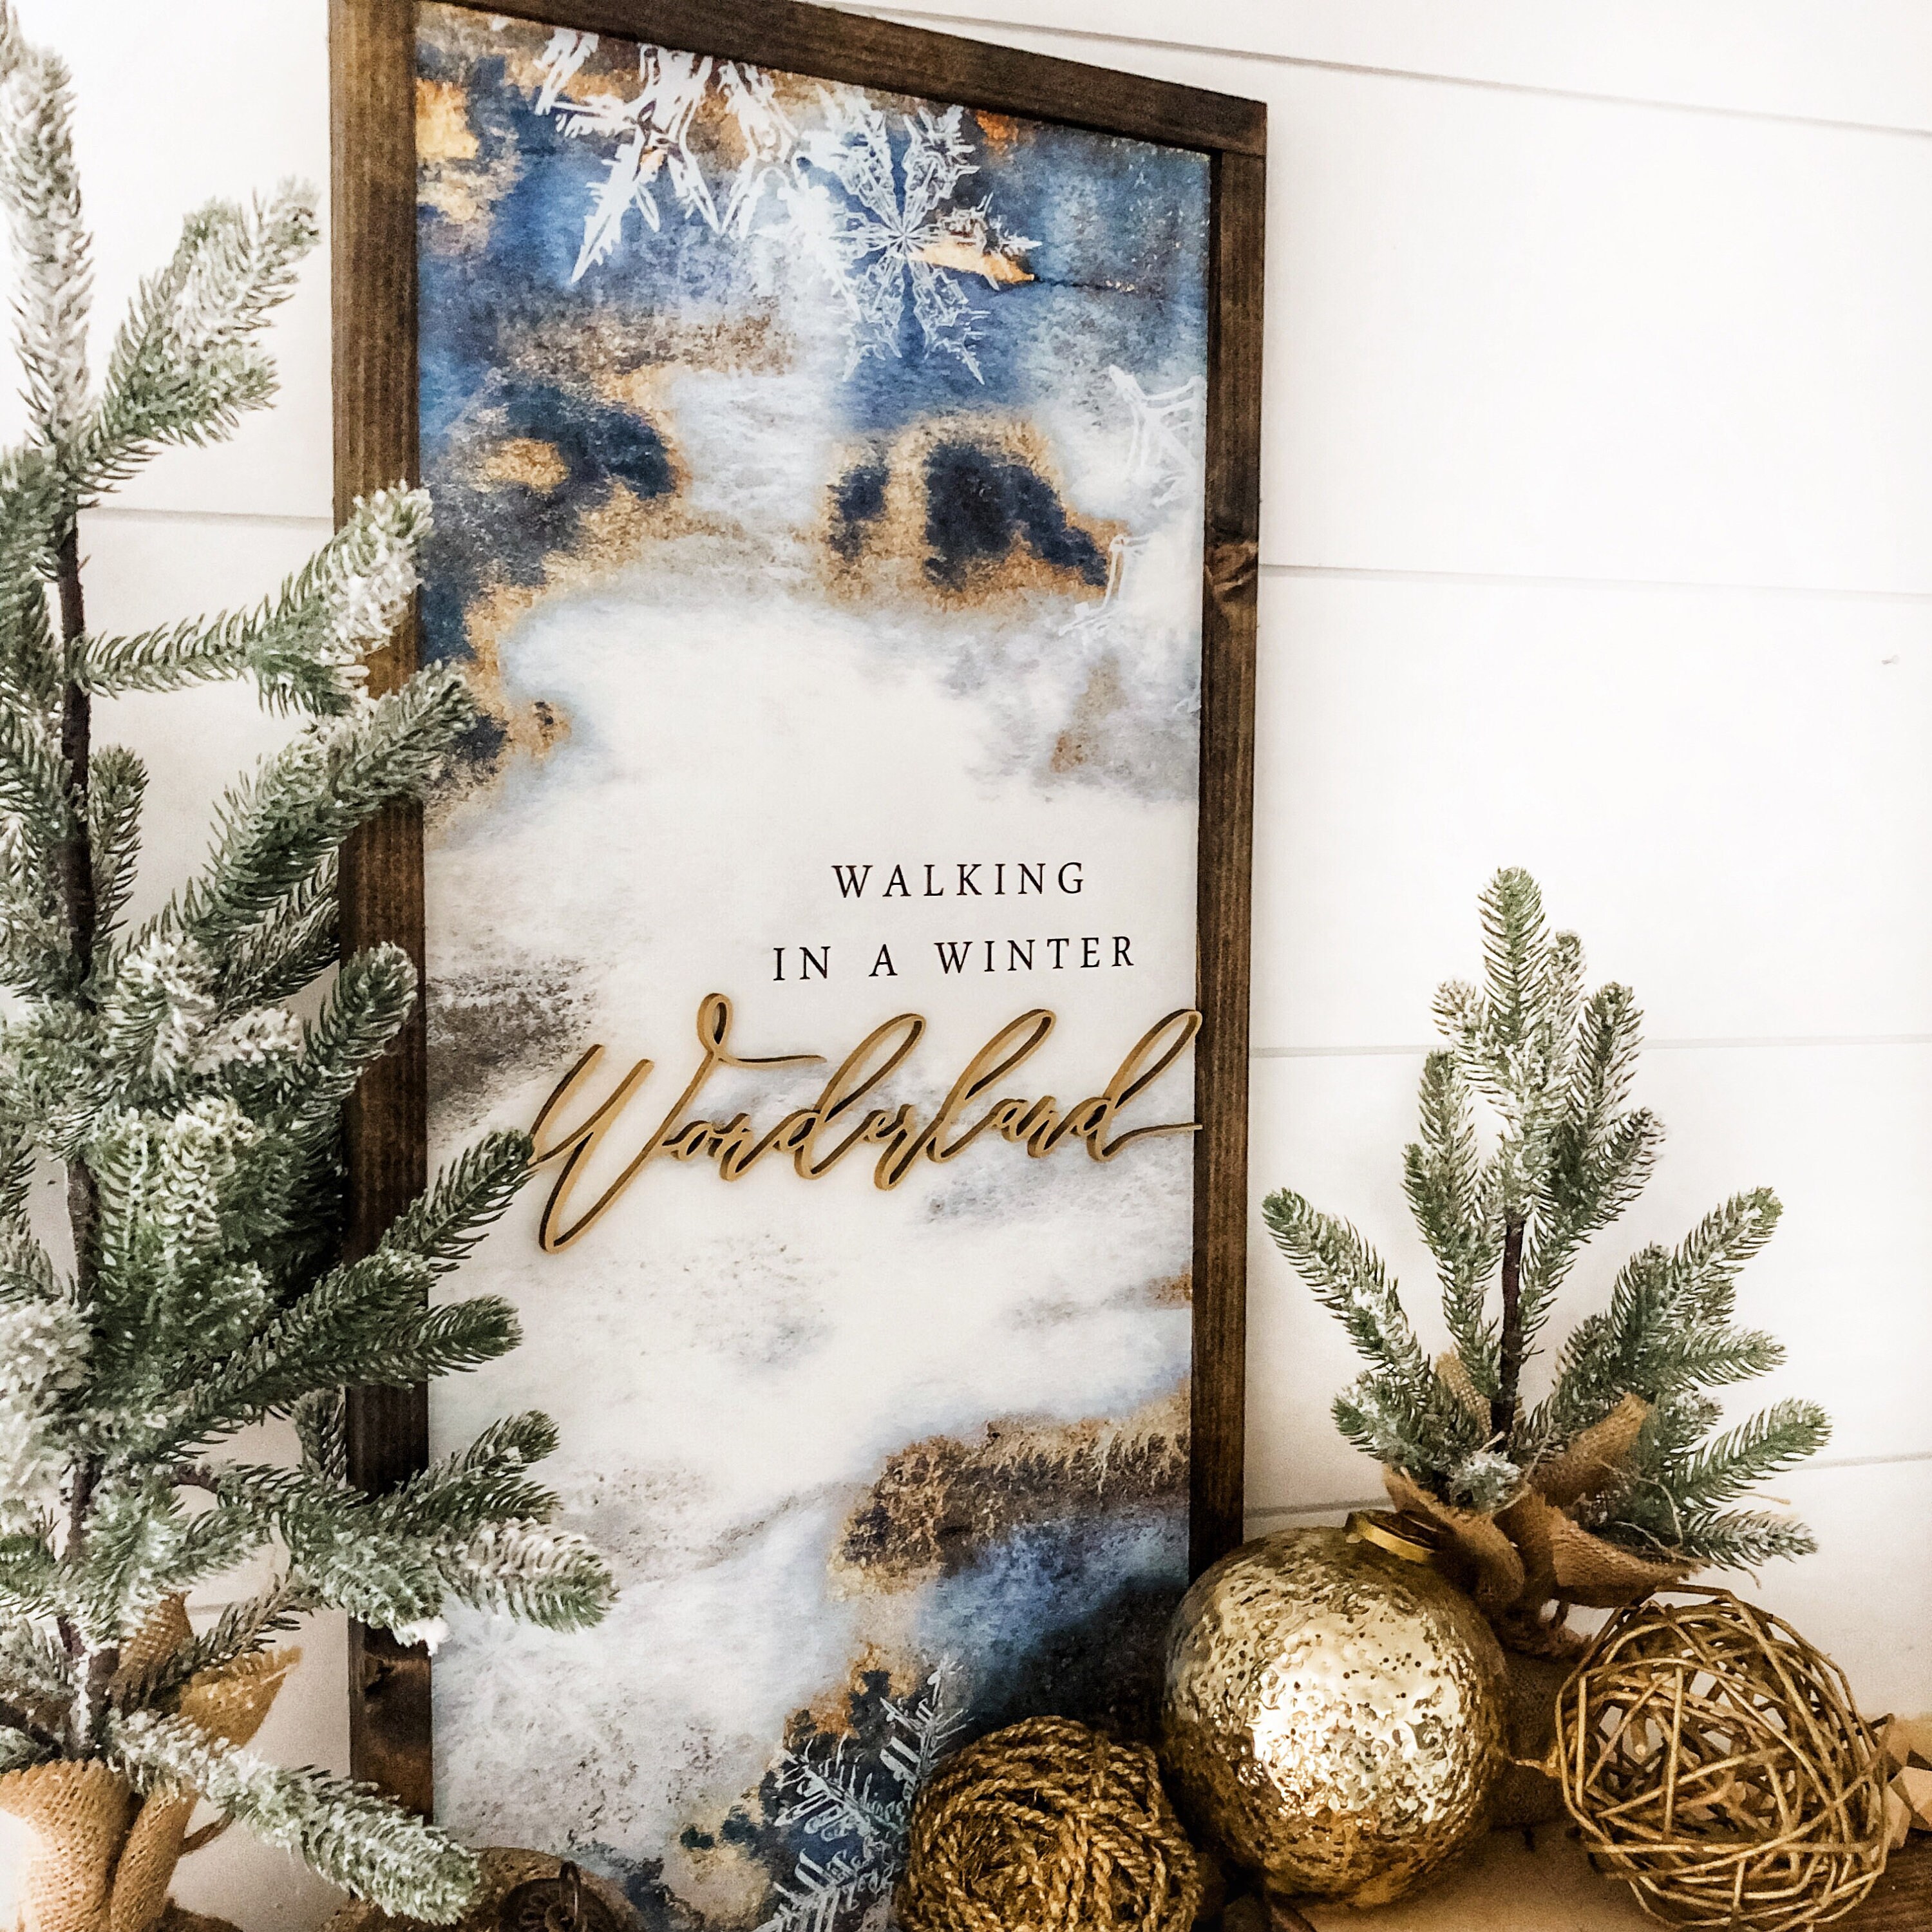 Welcome to Our Winter Wonderland Sign Farmhouse Christmas Décor Decorations  Wall Art Décor Home 8x12 208120097007